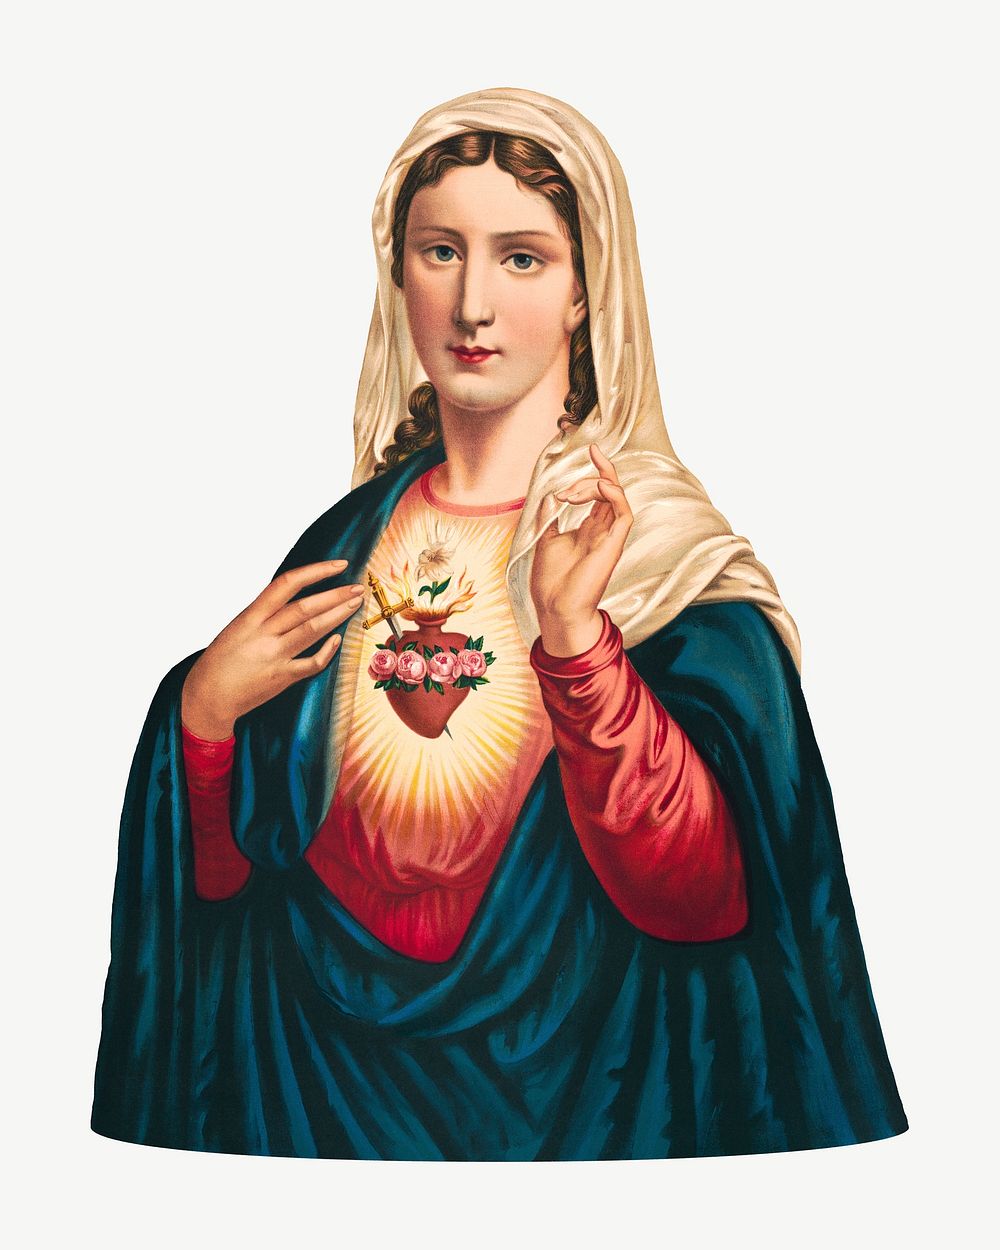 S.S. Heart of Mary, vintage religious illustration psd. Remixed by rawpixel.